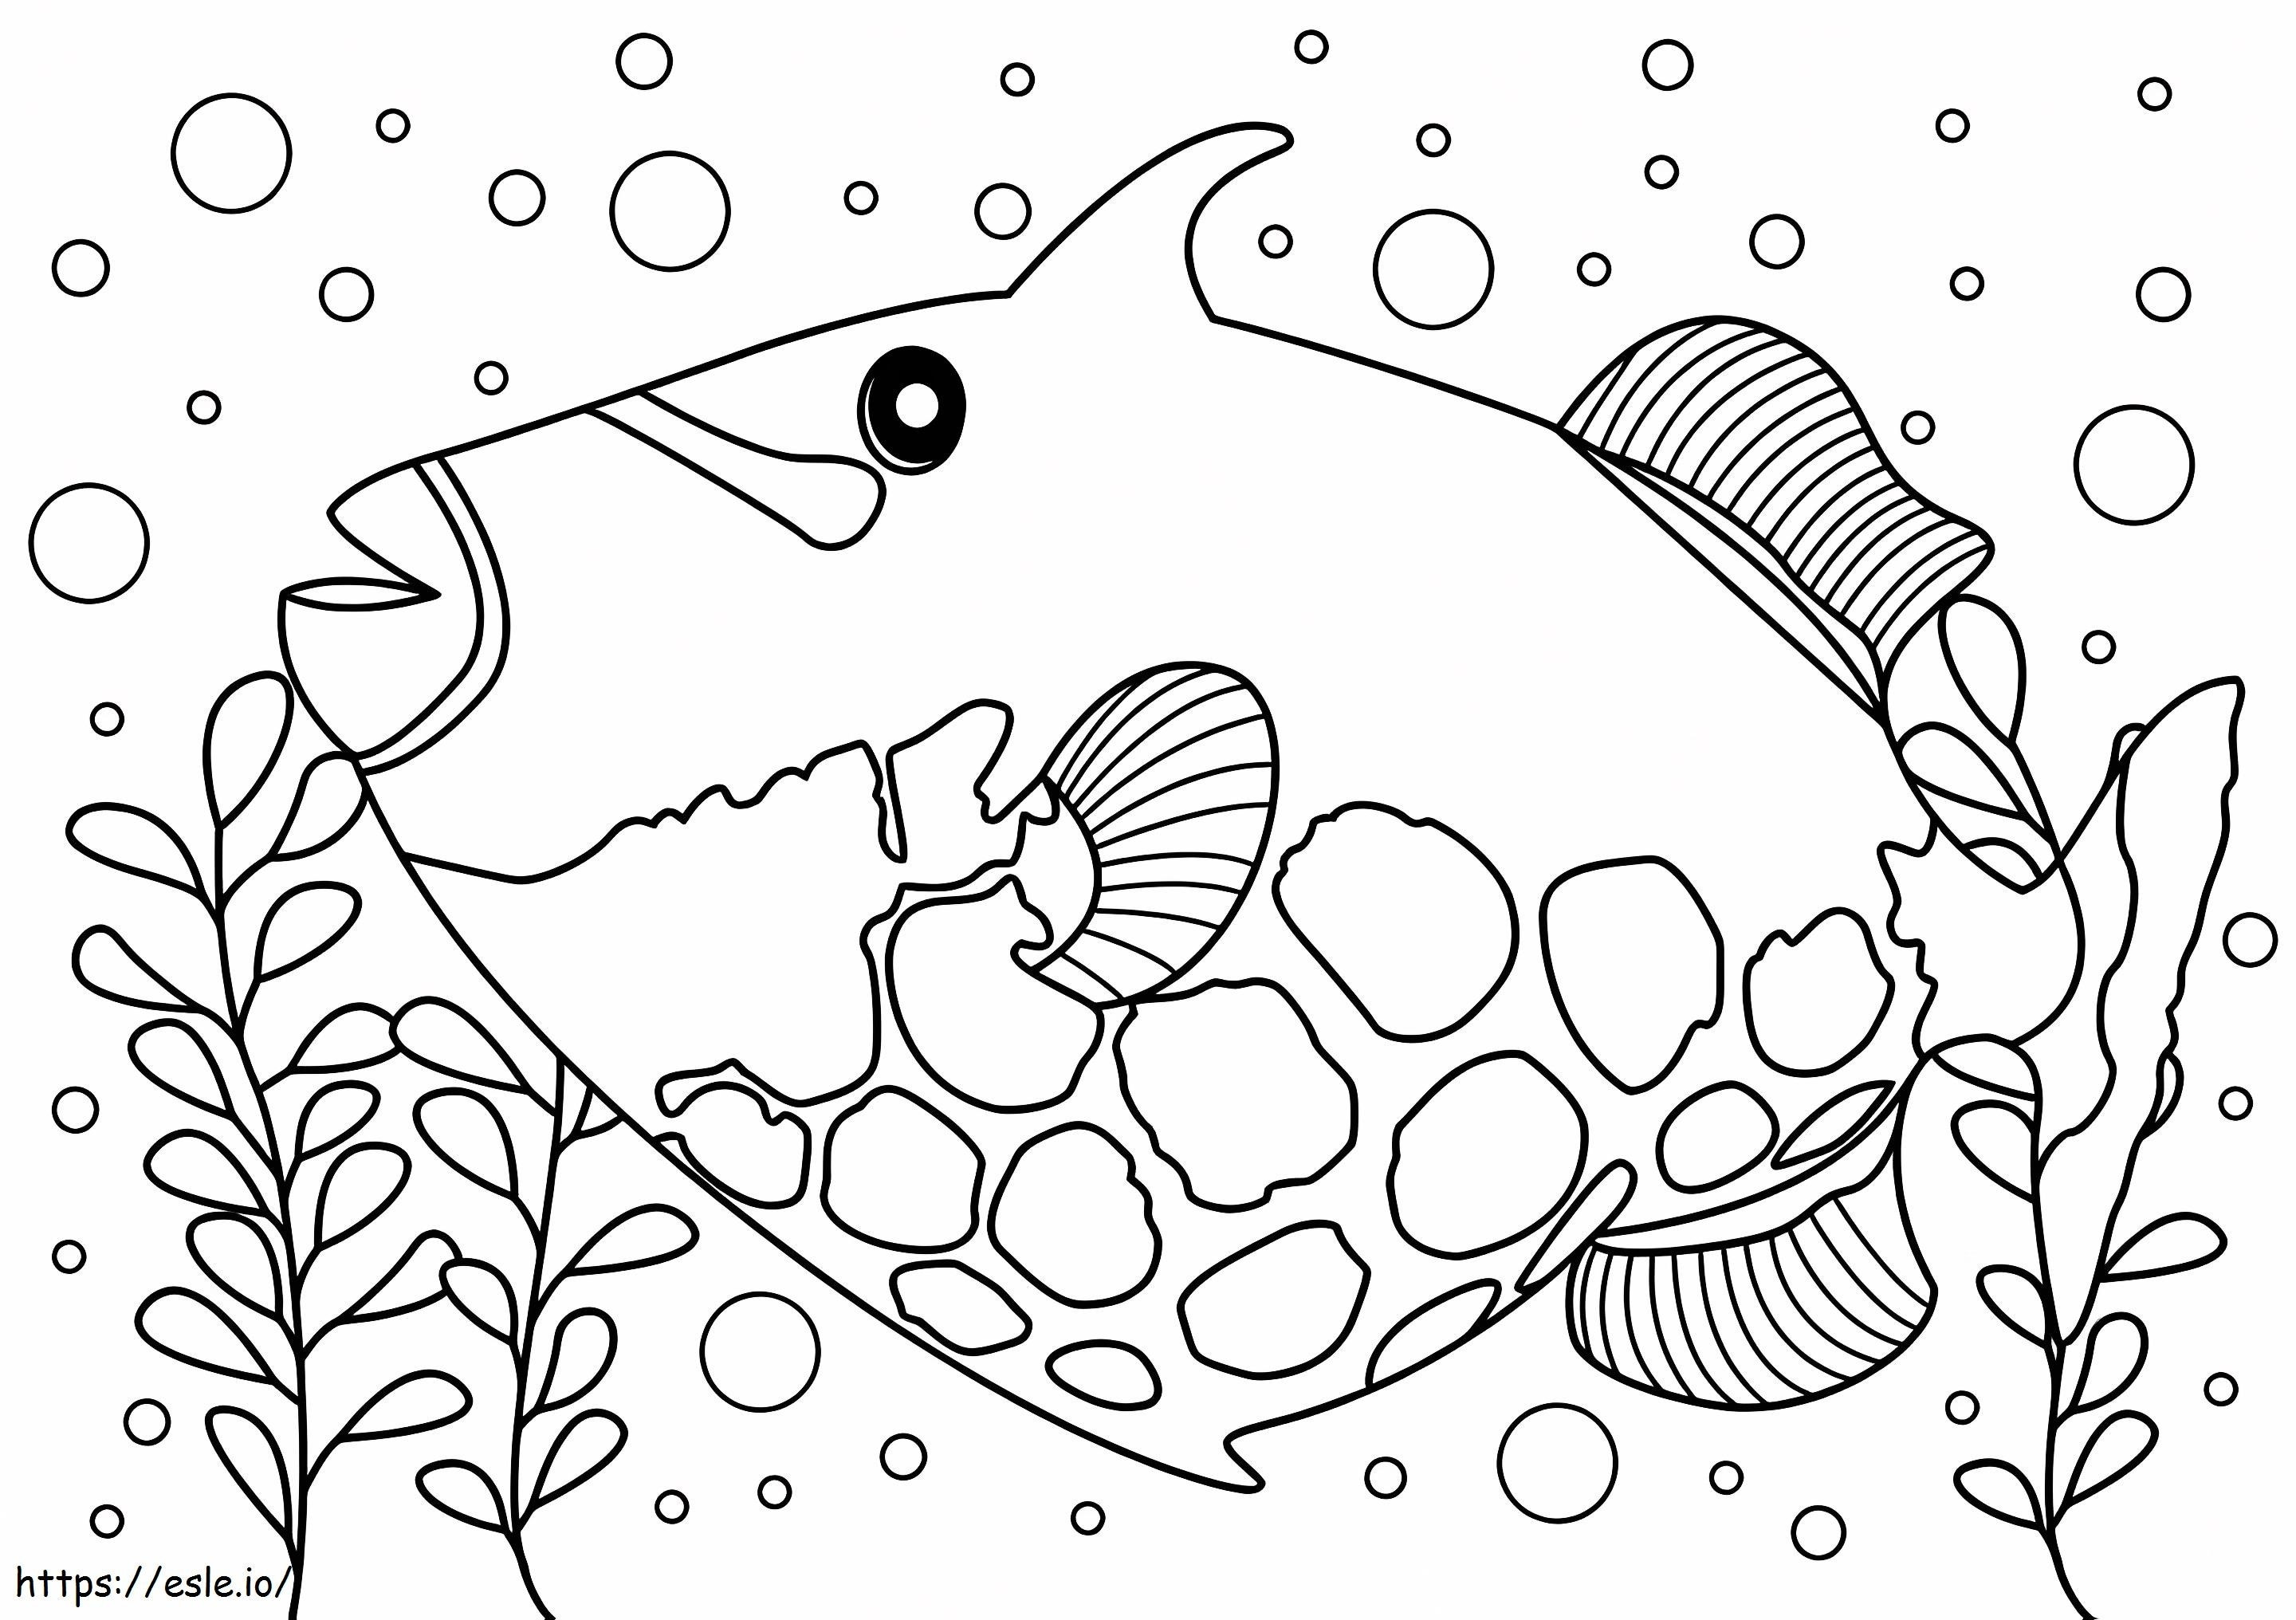 Triggerfish coloring page